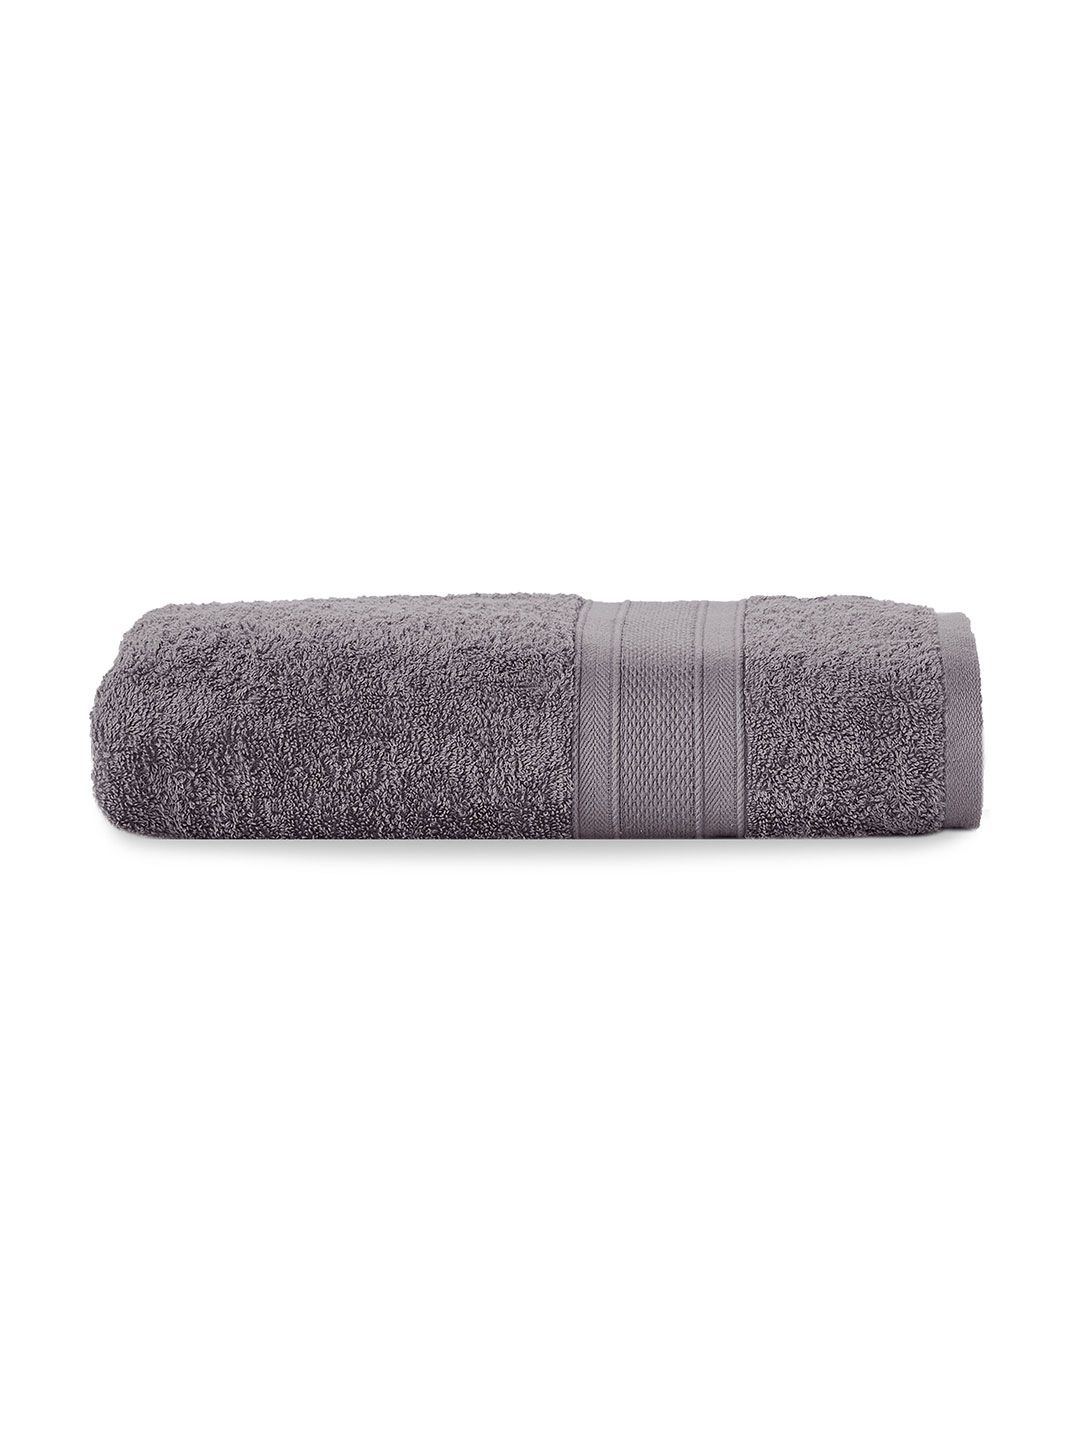 Trident Charcoal Solid 500 GSM Pure Cotton Bath Towel Price in India